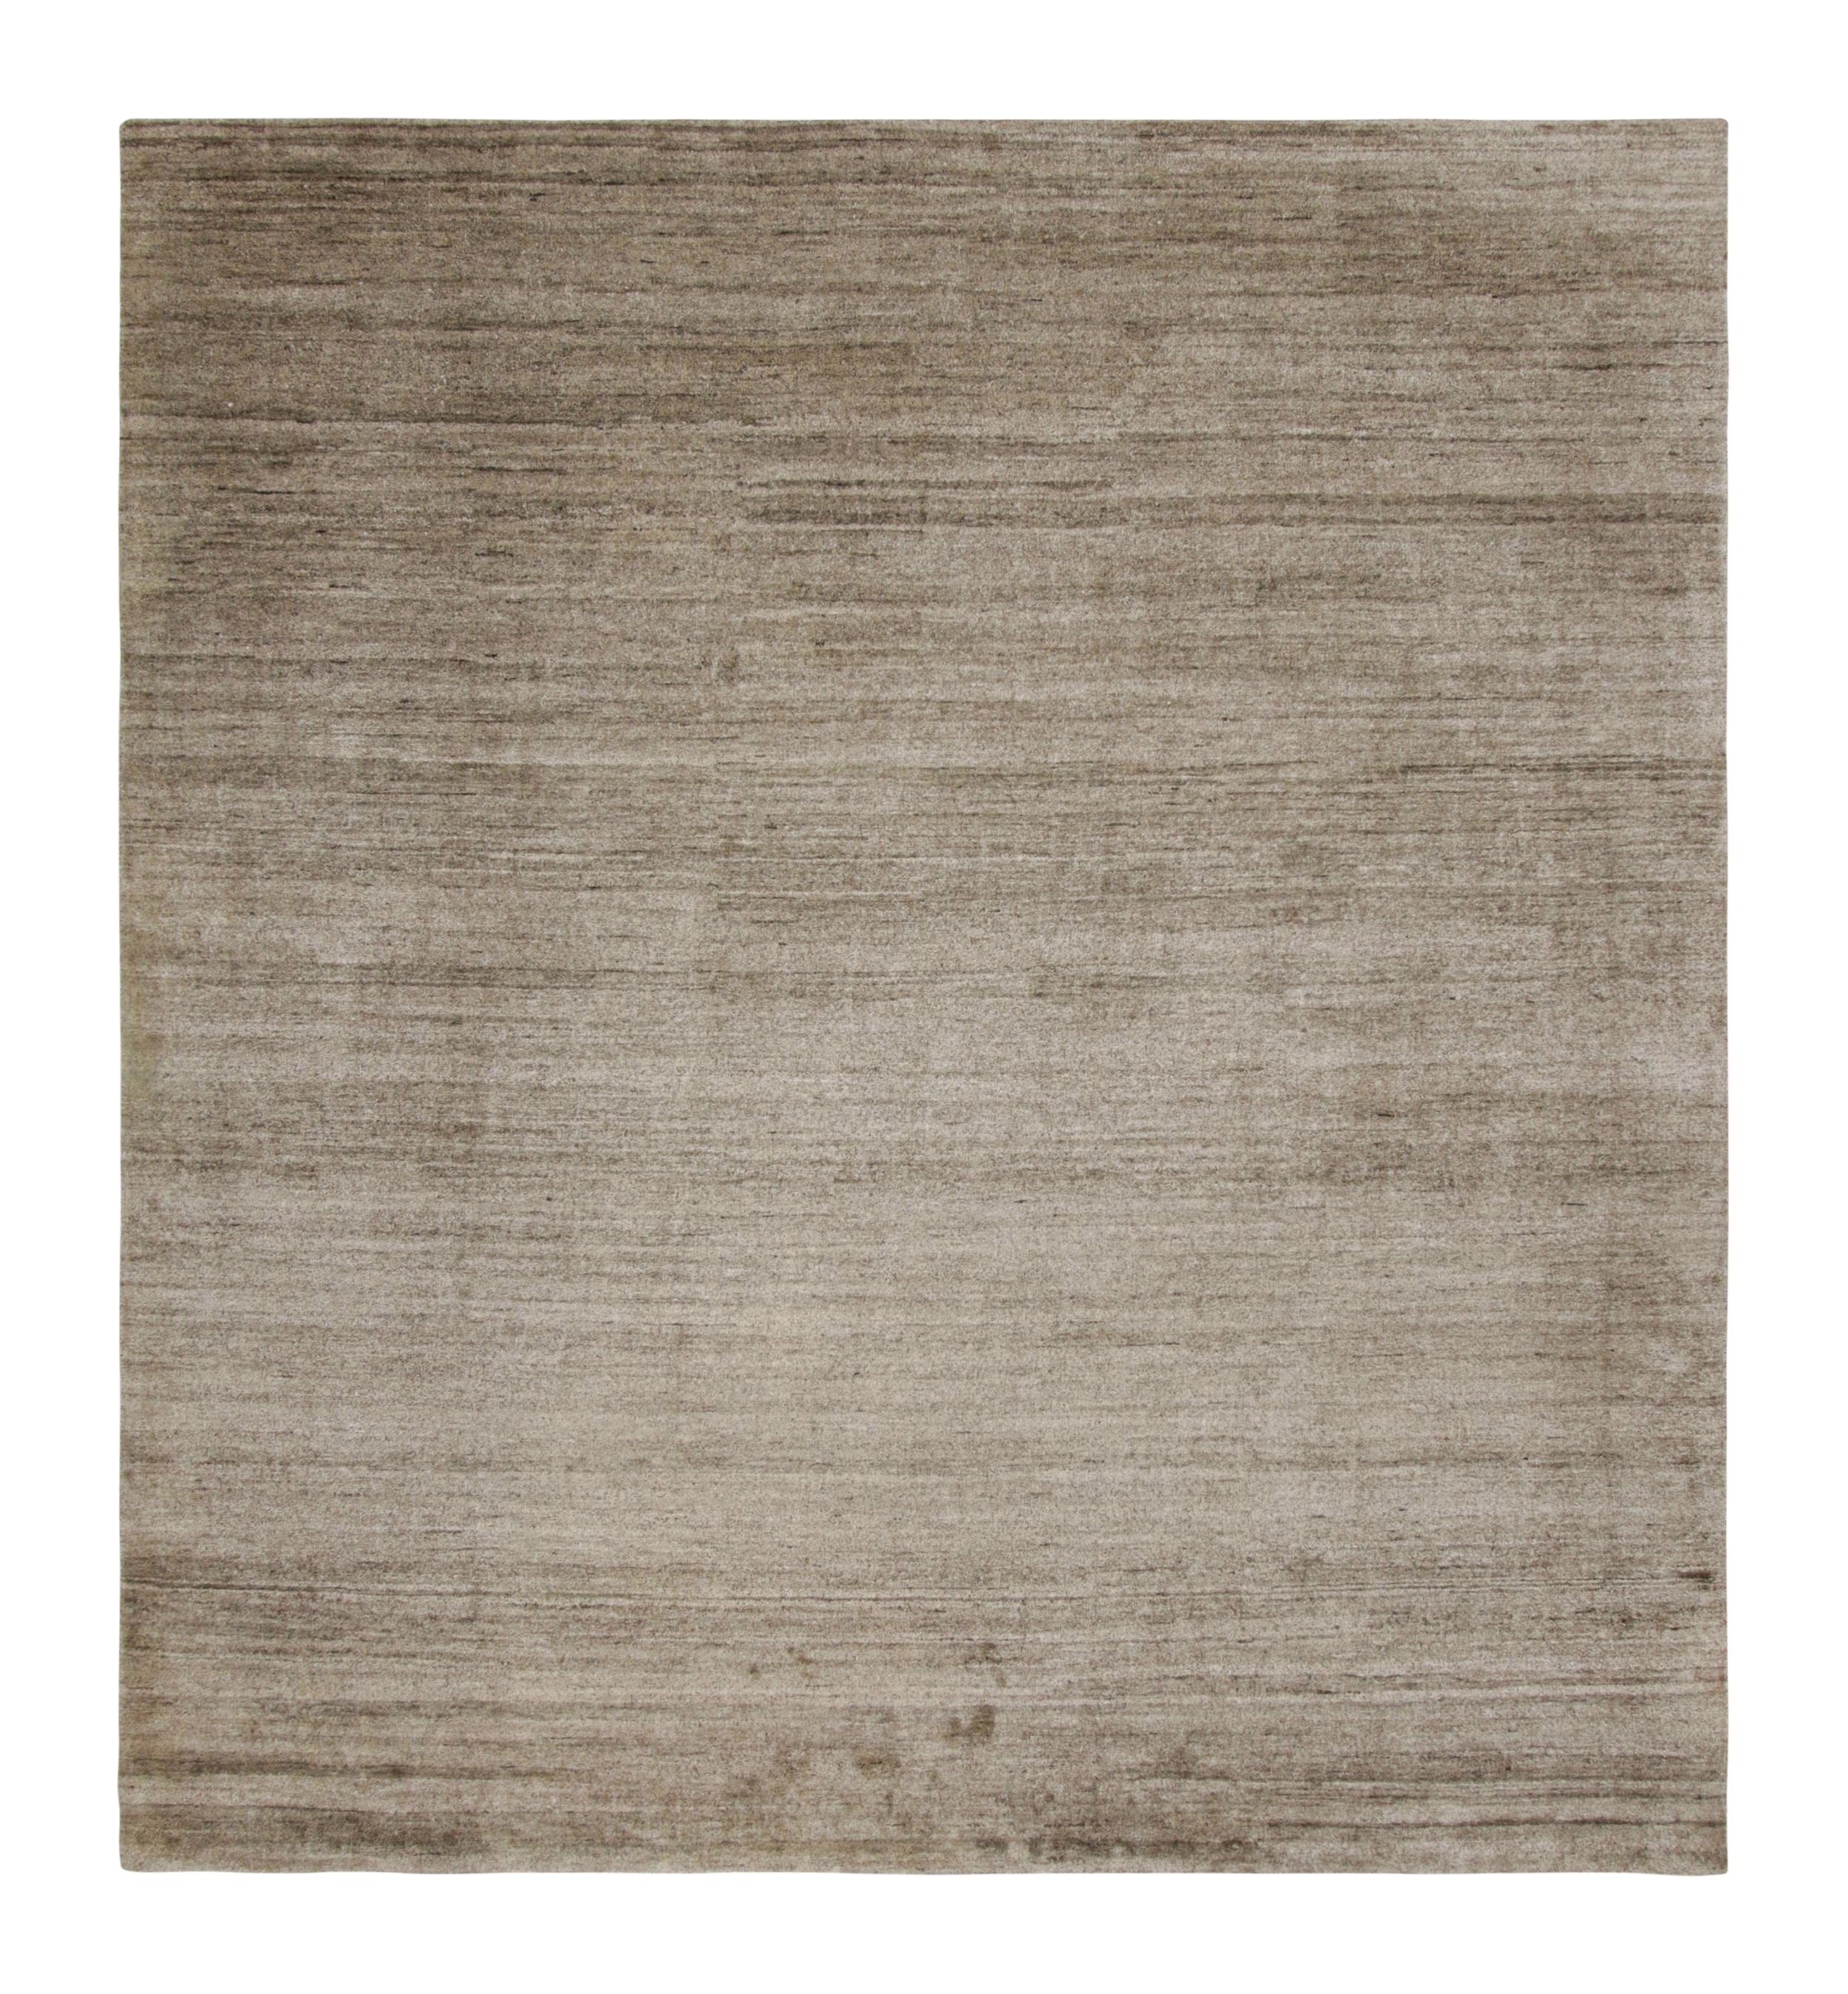 Modern Rug & Kilim’s Contemporary Textural Rug in Beige-Brown Tones and Striae For Sale